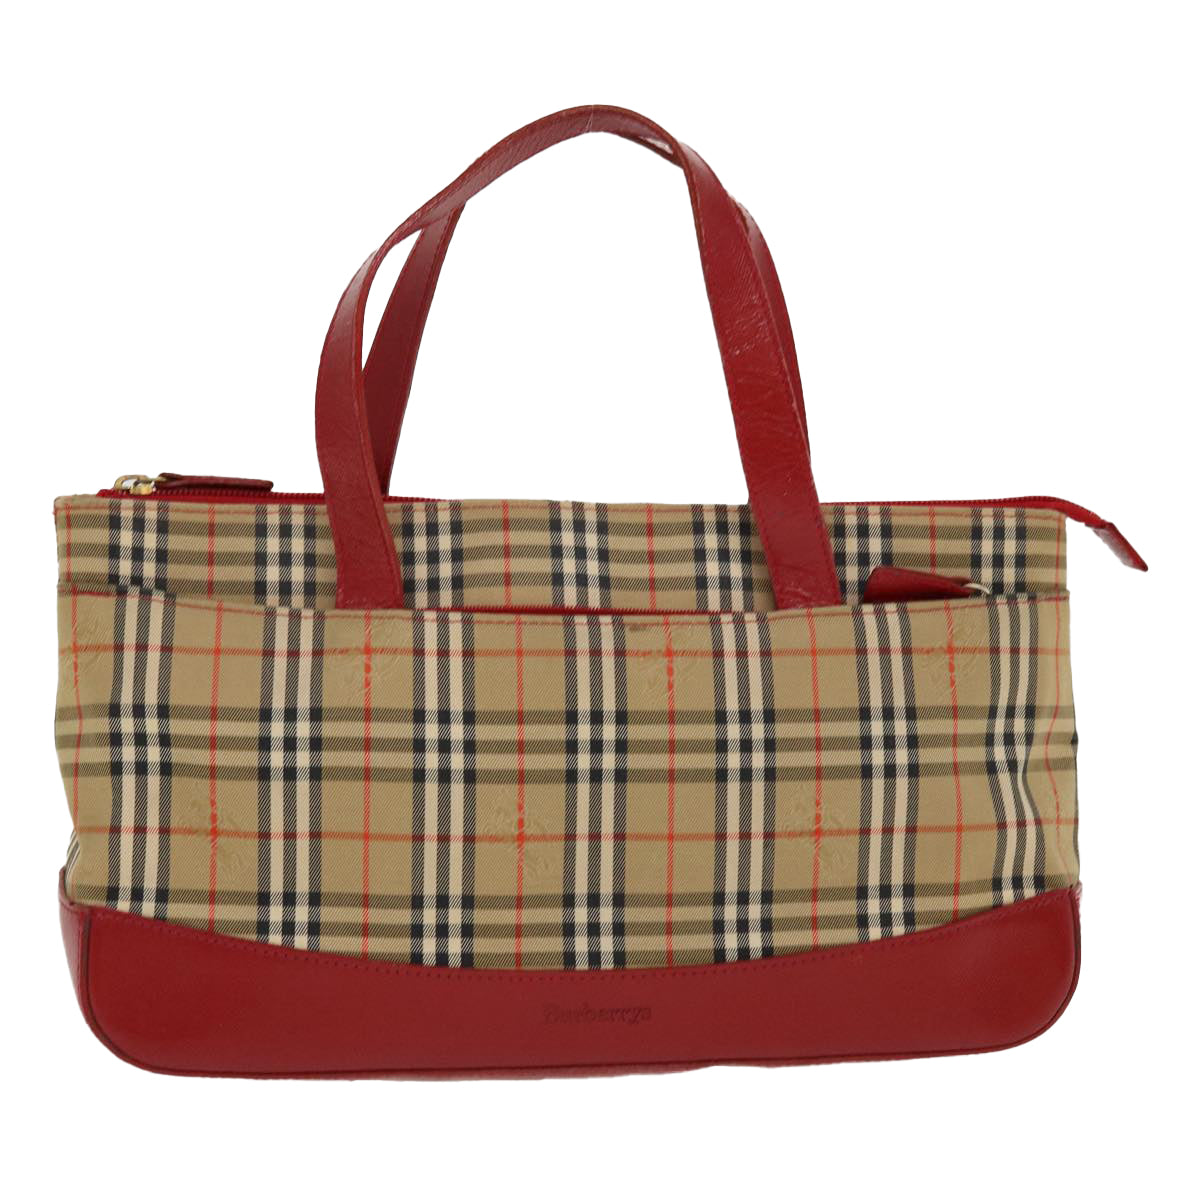 Burberrys Hand Bag Nylon Leather Beige Red Auth bs4630